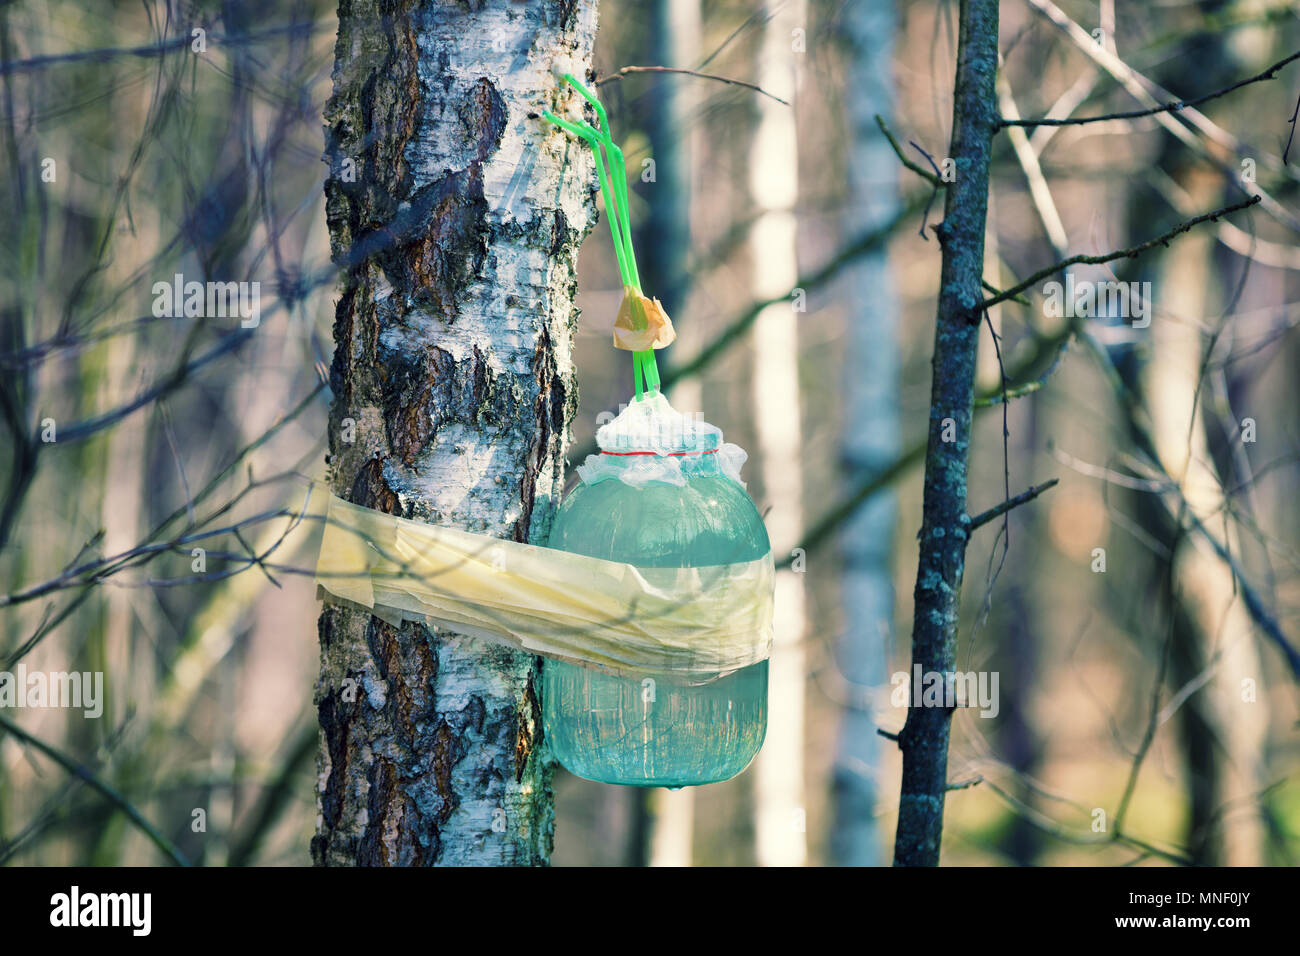 Production of birch sap in glass jar in the forest. Springtime Stock Photo